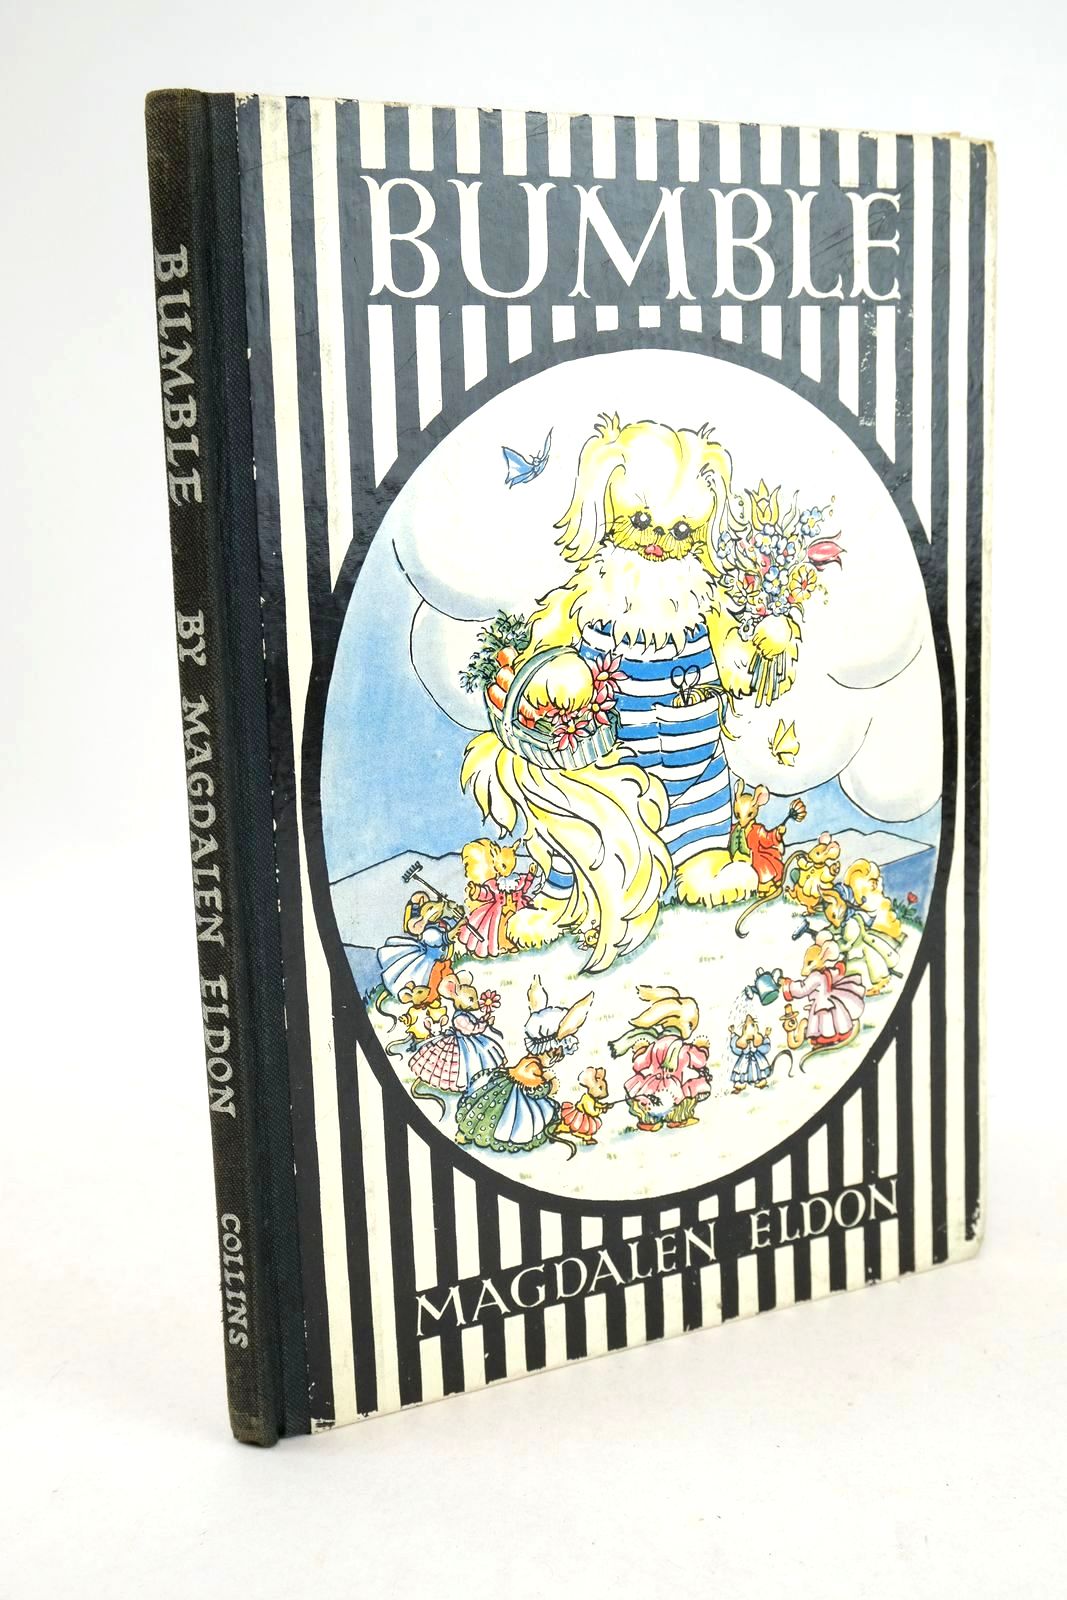 Photo of BUMBLE written by Eldon, Magdalen illustrated by Eldon, Magdalen published by Collins (STOCK CODE: 1325846)  for sale by Stella & Rose's Books